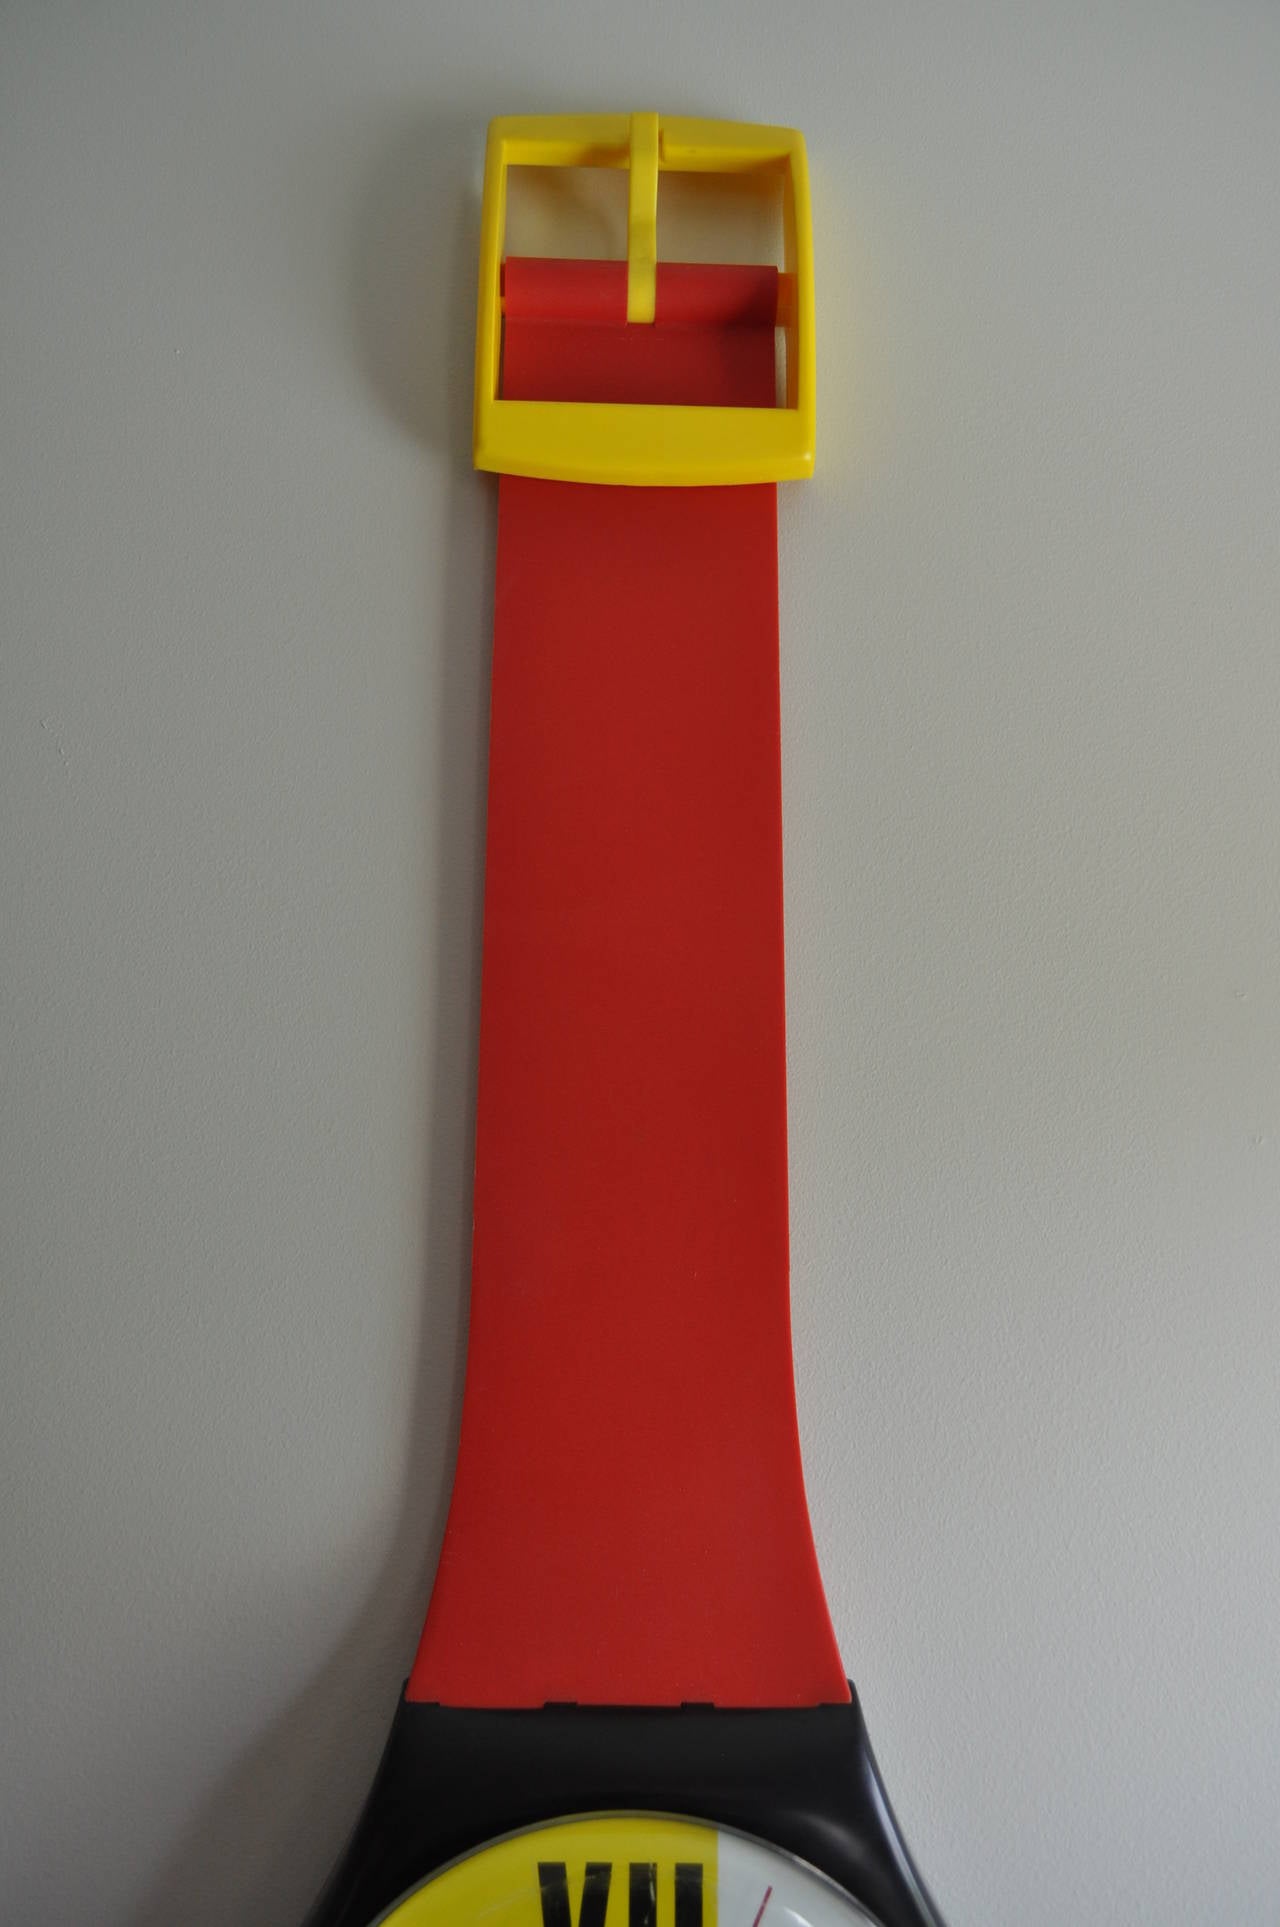 Iconic 1980's Swatch Watch Pop Art Wall Clock.  This wall mounted sculptural piece features bright and bold Memphis style primary red, blue, yellow, black and white colors.  Can be displayed with or without the included original plastic case.  Made